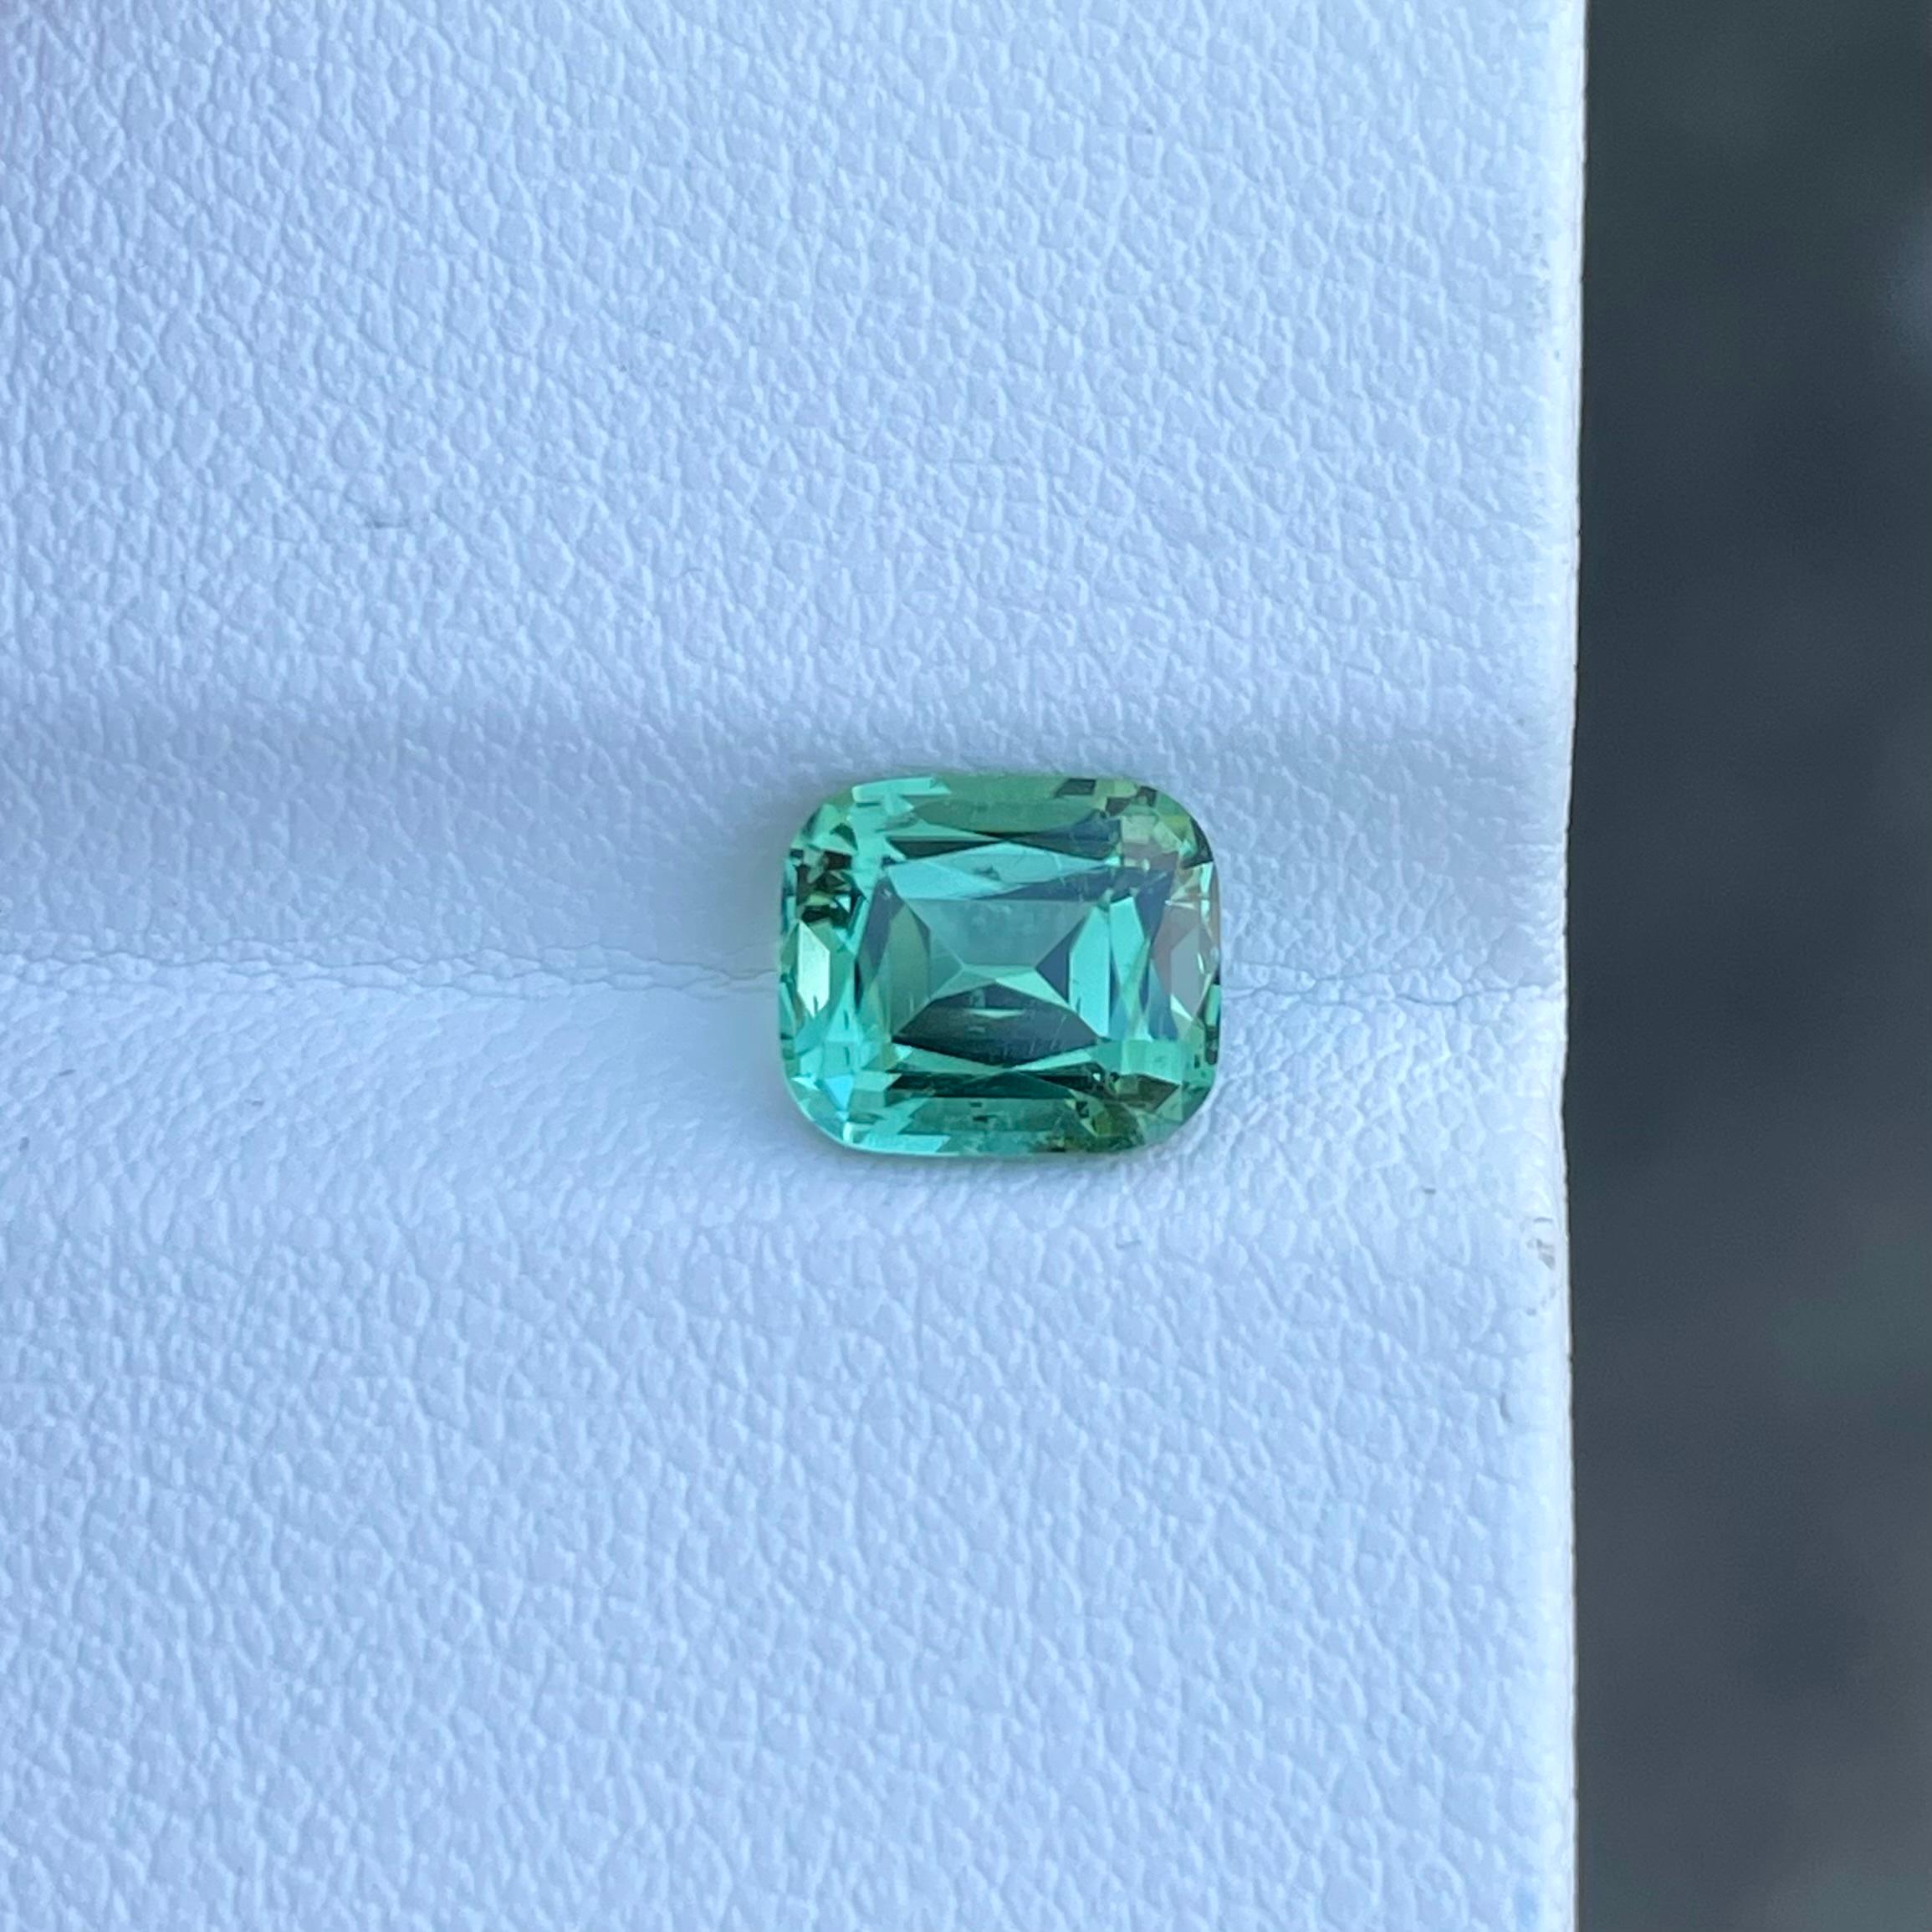 Weight 2.25 carats 
Dimensions 8.2x7.1x5.3 mm
Treatment None
Clarity VVS (Very, Very Slightly Included)
Origin Afghanistan
Shape Cushion
Cut Step Cushion





The Mint Green Tourmaline, weighing 2.25 carats, is a true marvel of nature sourced from